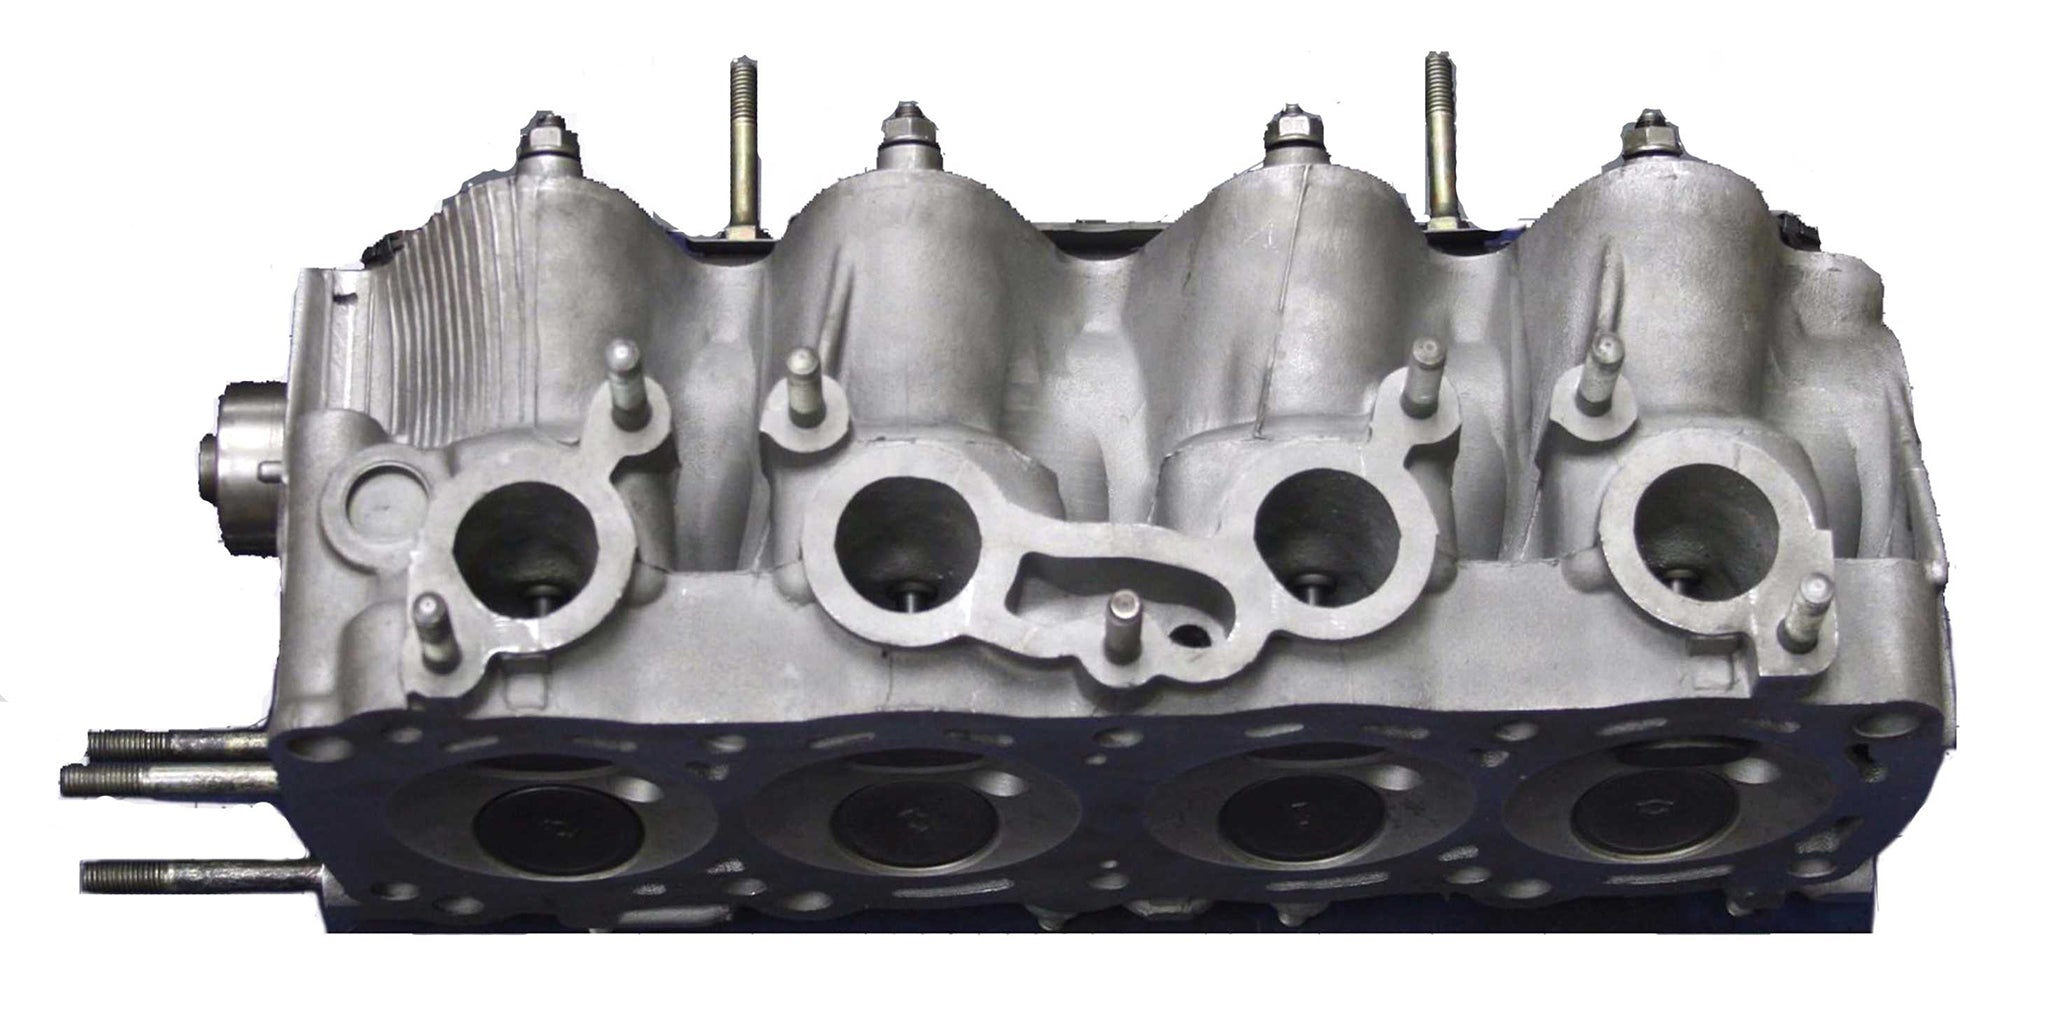 1983-1987 Nissan Pulsar, Sentra 1.6L E16 cylinder head cast # 52M Round Combustion Chamber